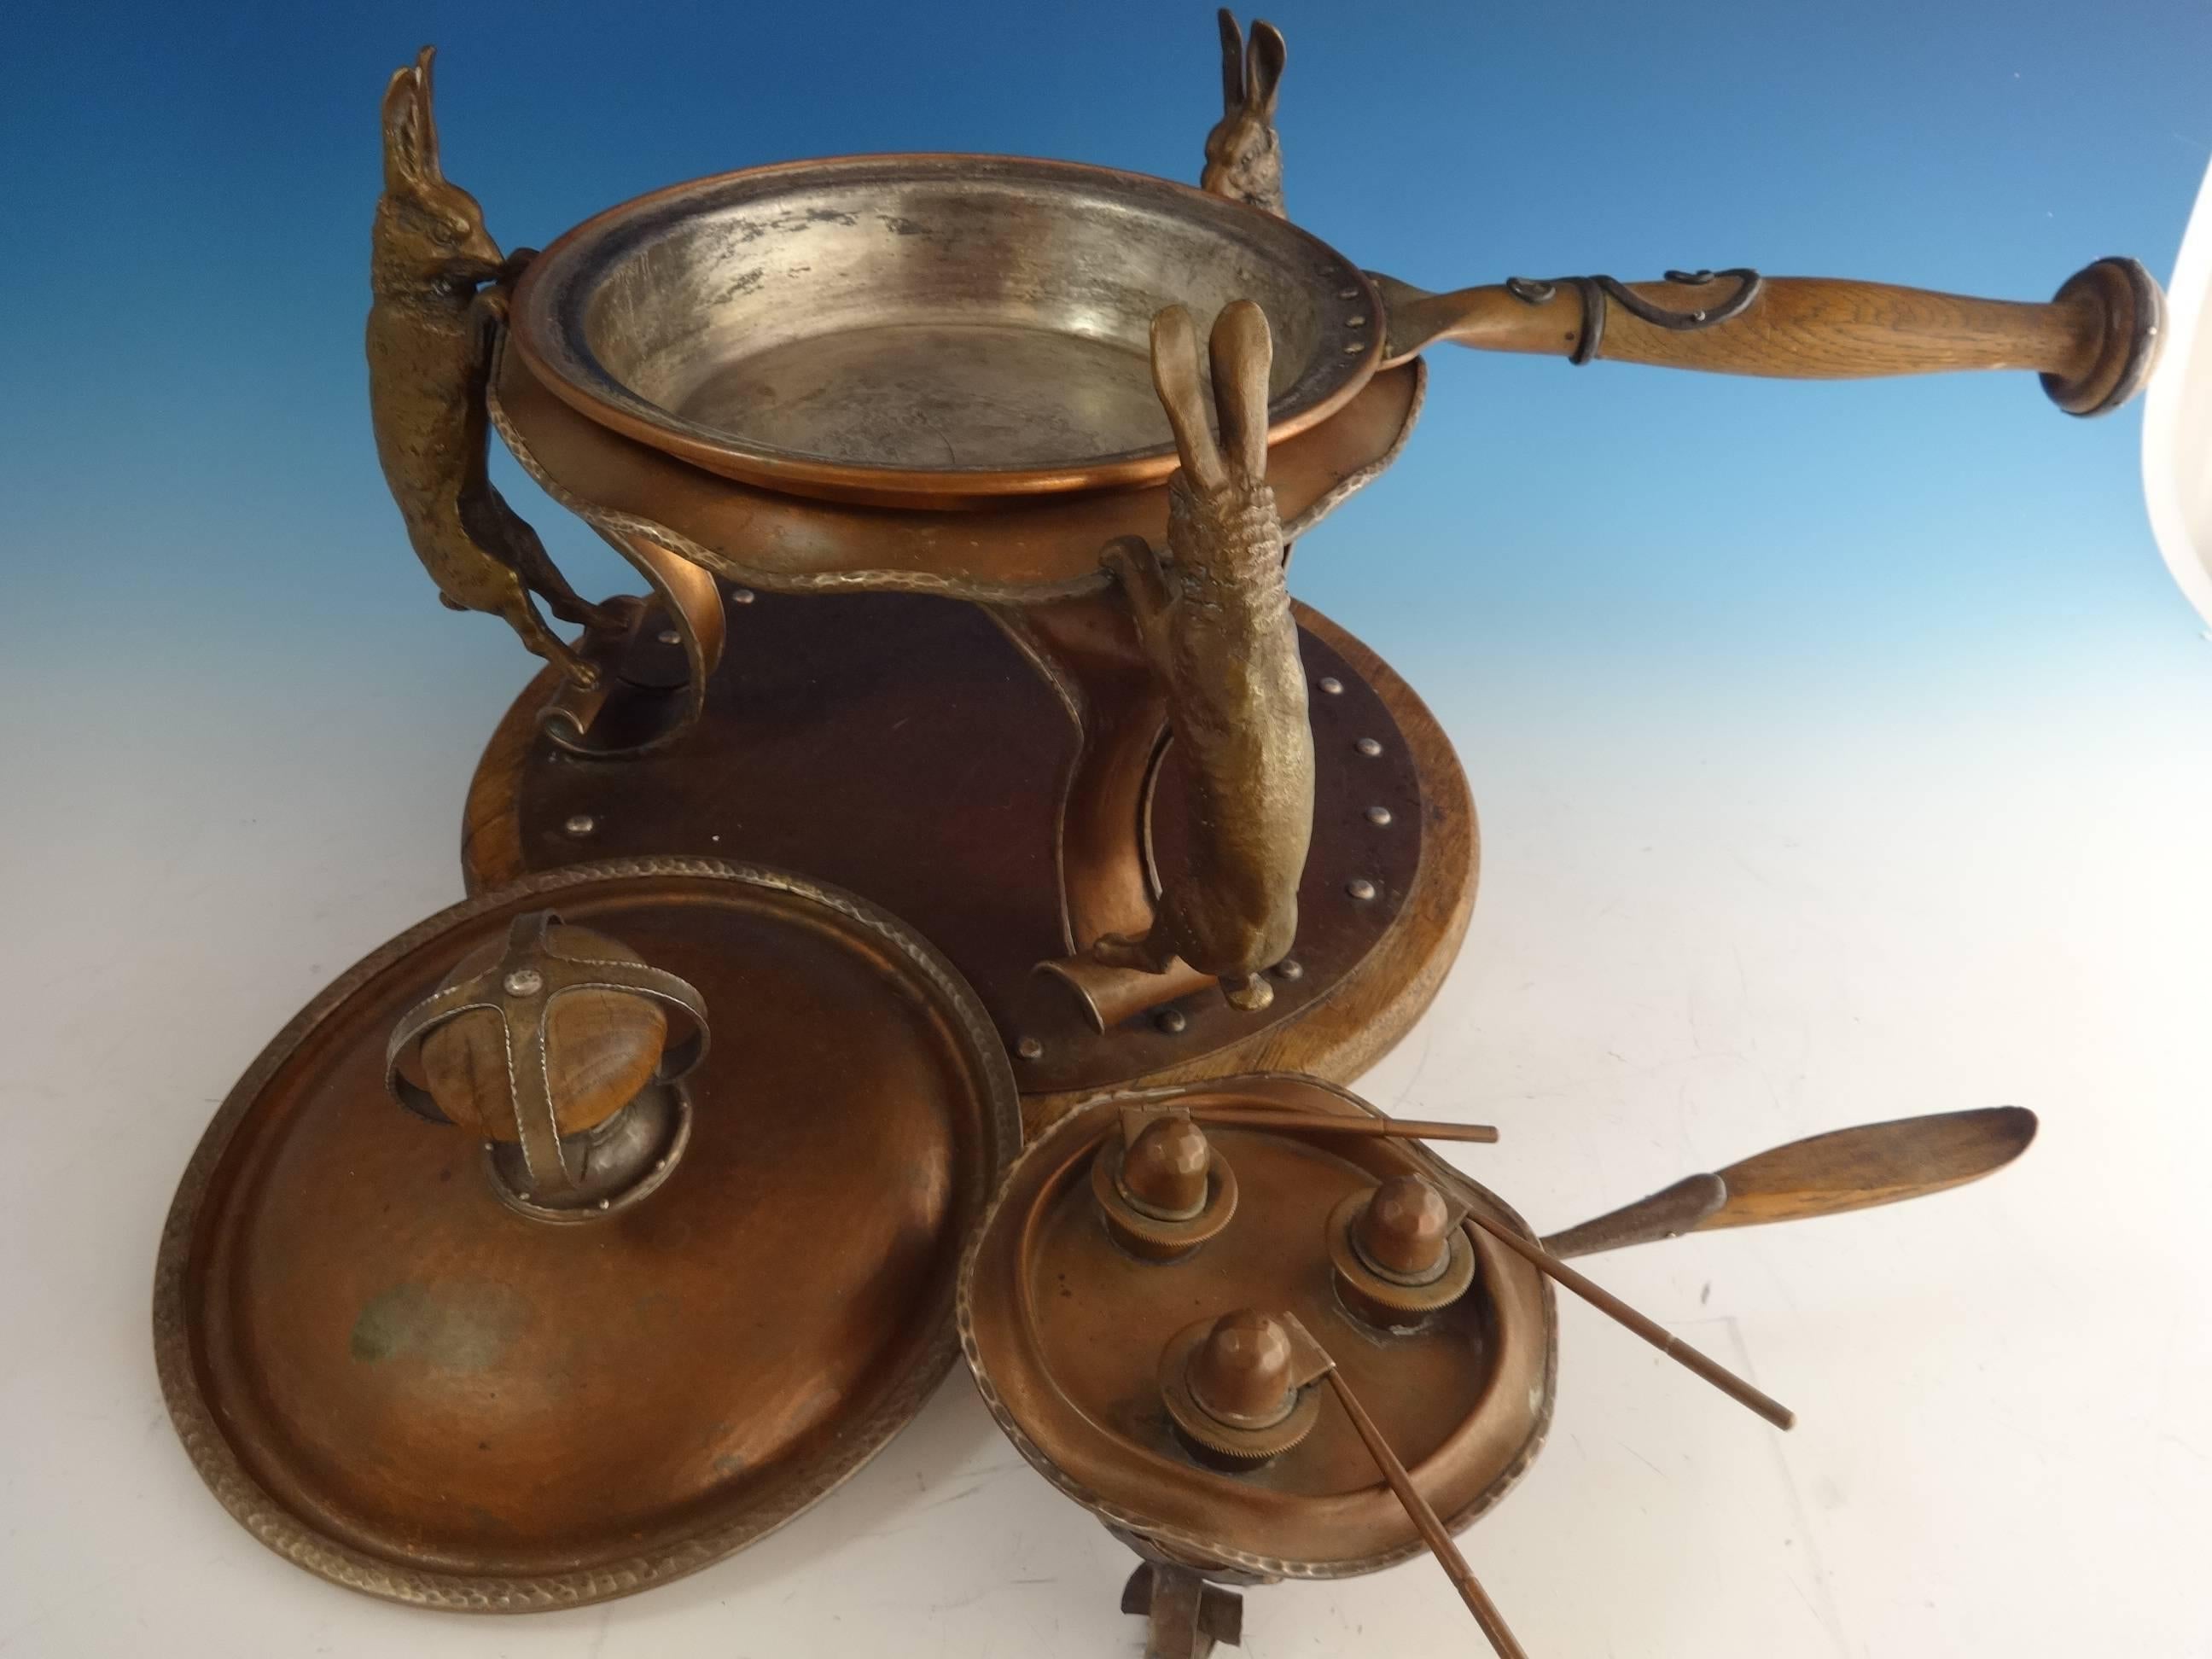 Arts & Crafts chafing dish made by Joseph Heinrichs featuring fabulous 3-D rabbits. The chaffing dish is made of copper with applied silver scrollwork on the wood handle and finial. It also includes the stand and burner. The piece measures